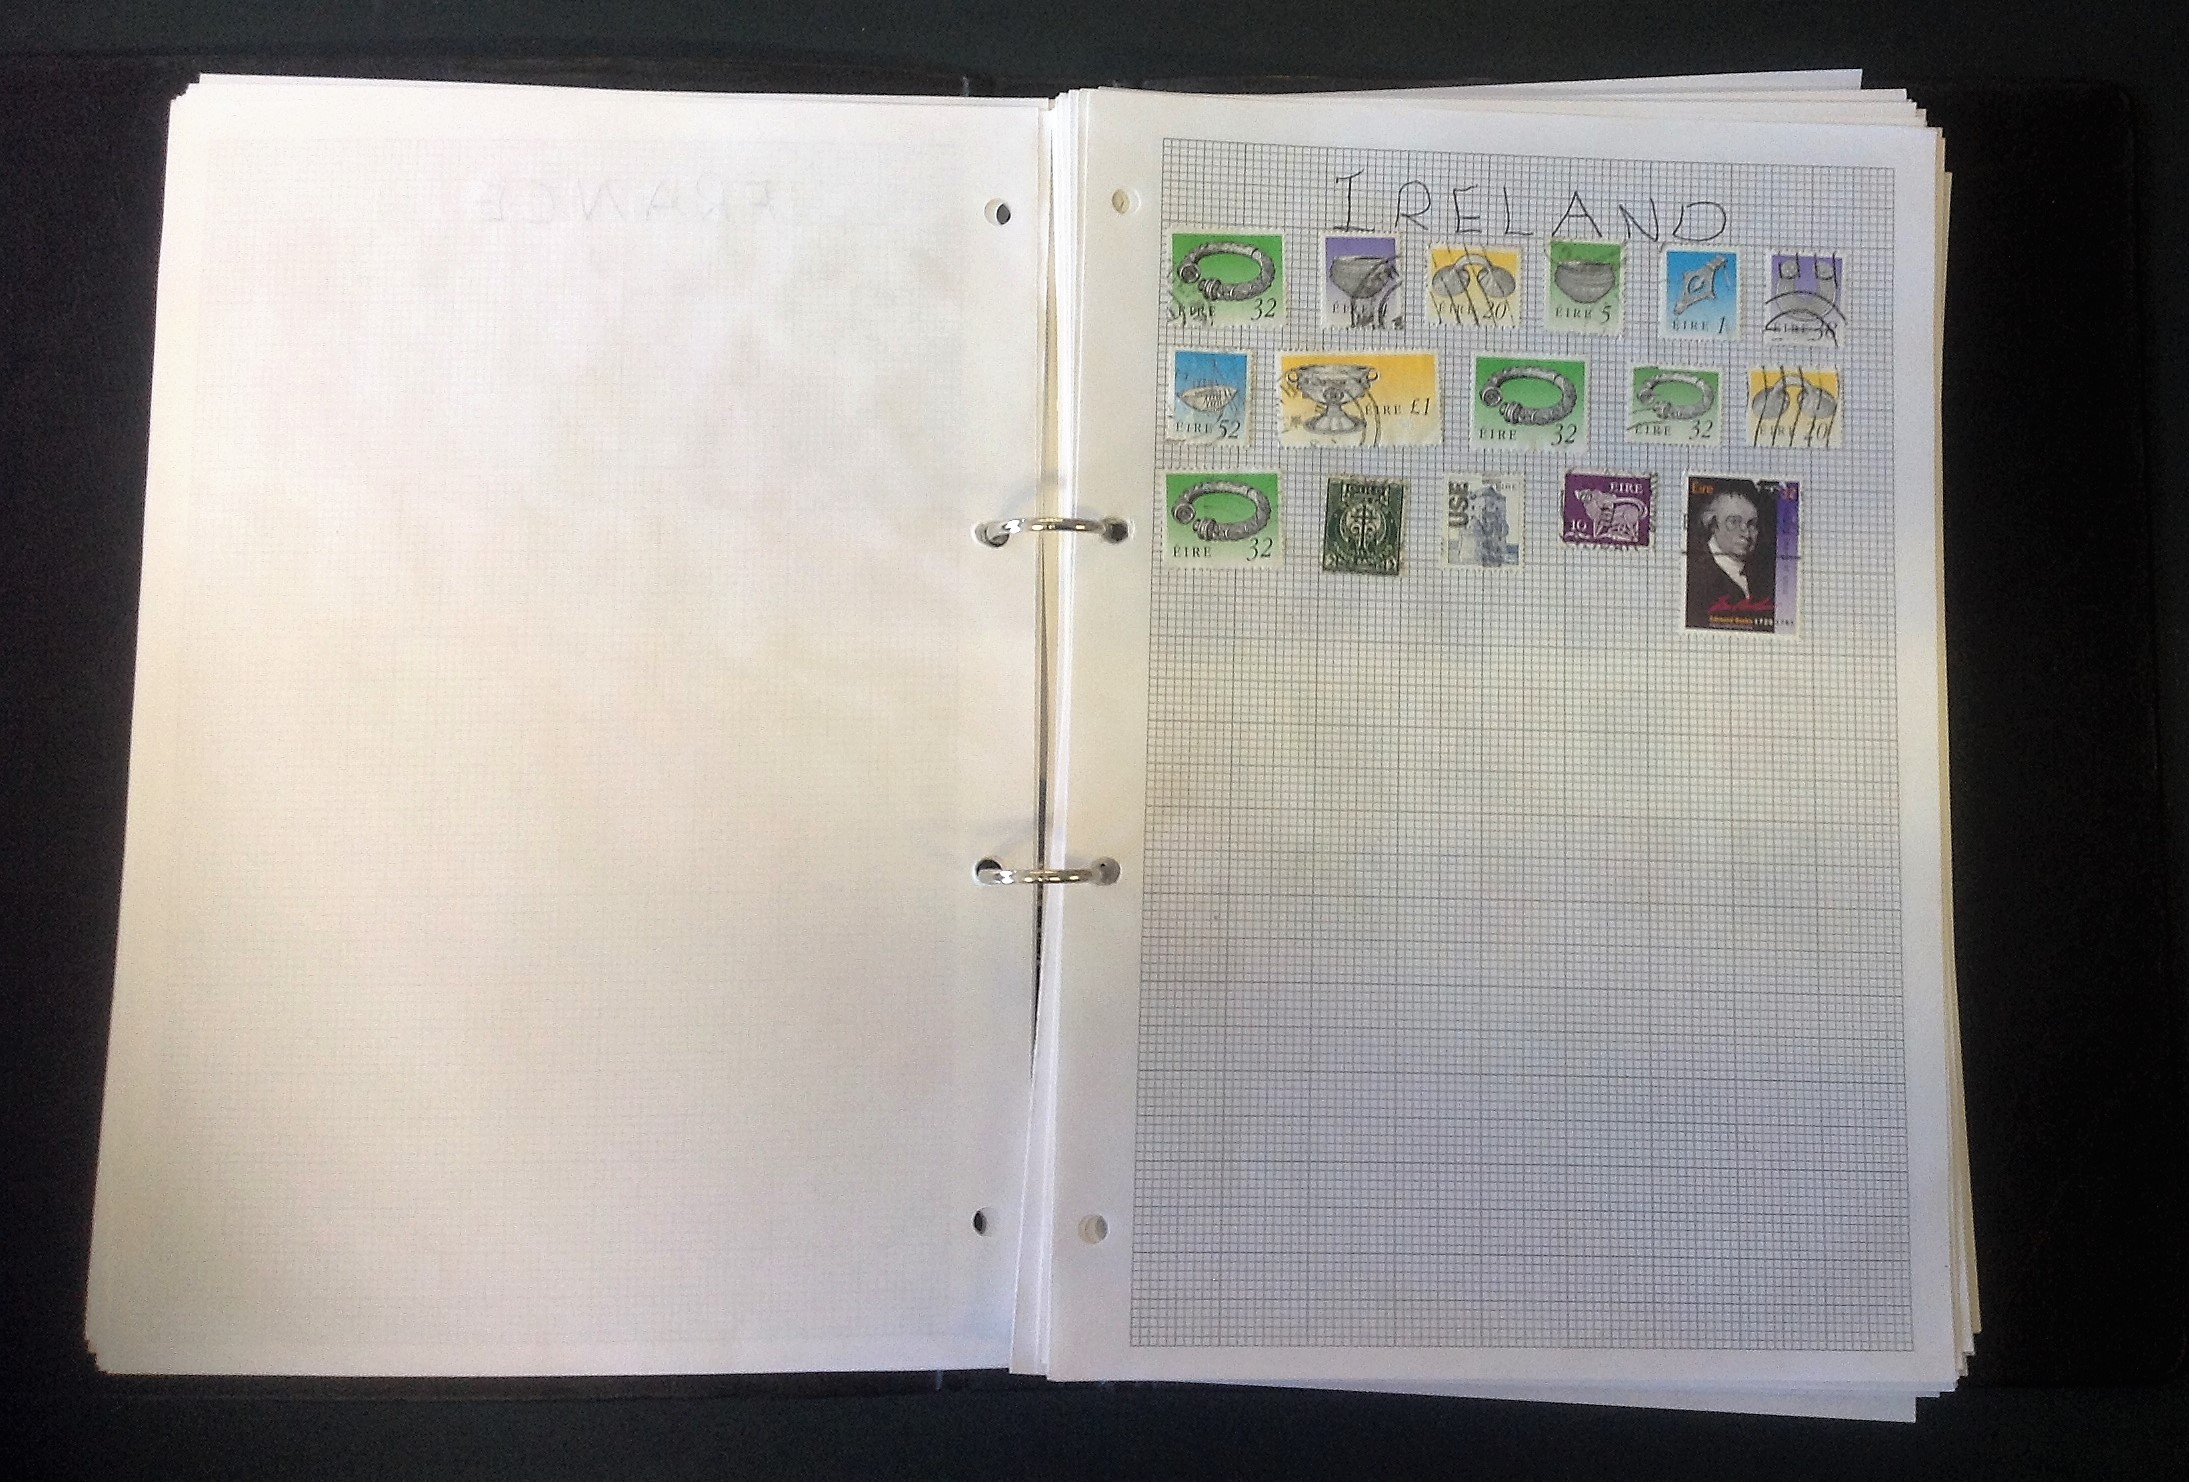 World stamp collection in ring binder. 50+ pages. Includes Singapore, Russia, Kenya, India, USA, - Image 8 of 8